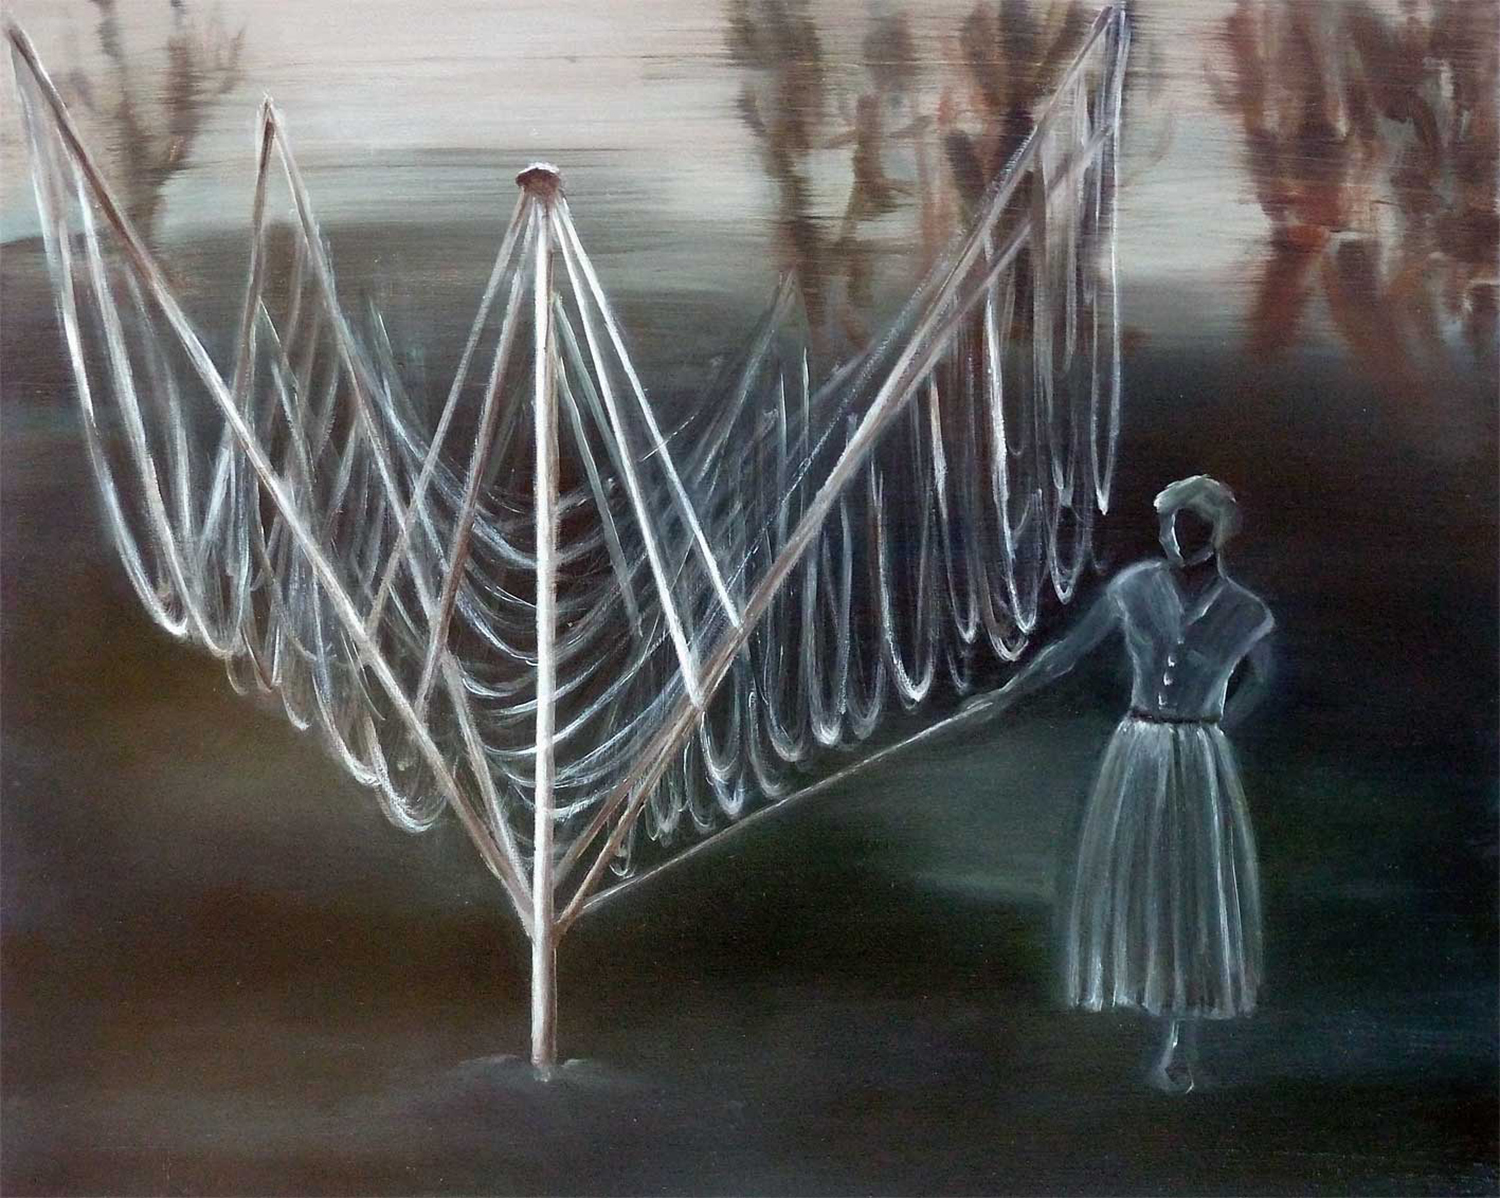 Oil colour on canvas 'Wäschespinne' Angelika Hasse 2011 contemporary painting